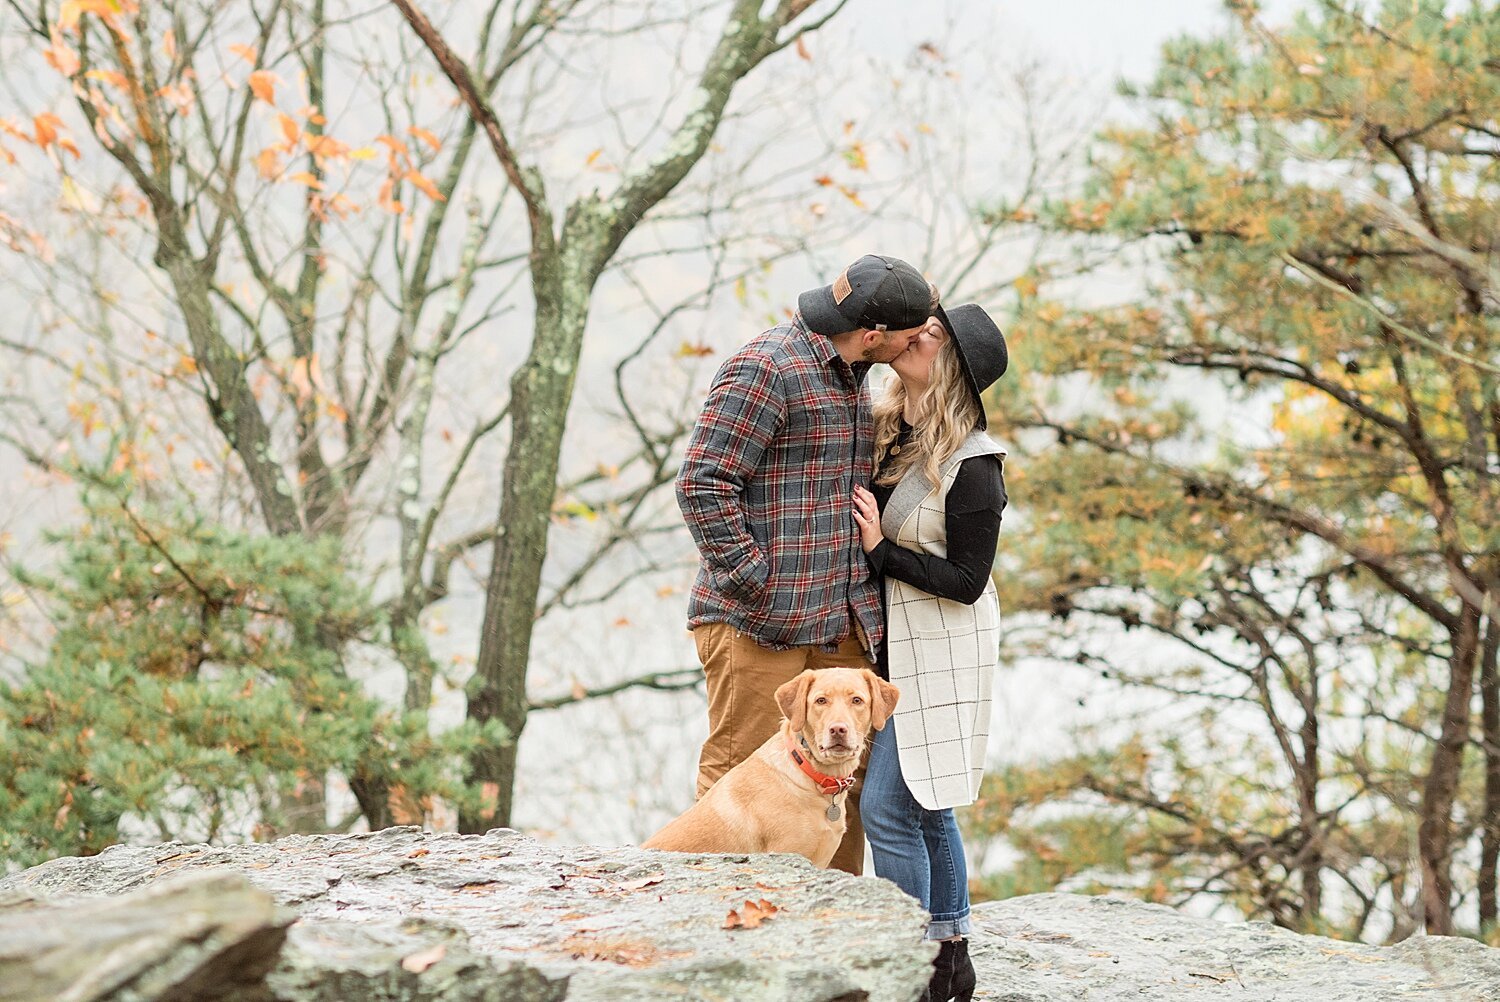 Pinnacle Overlook Holtwood PA Surprise Proposal Photography_8733.jpg